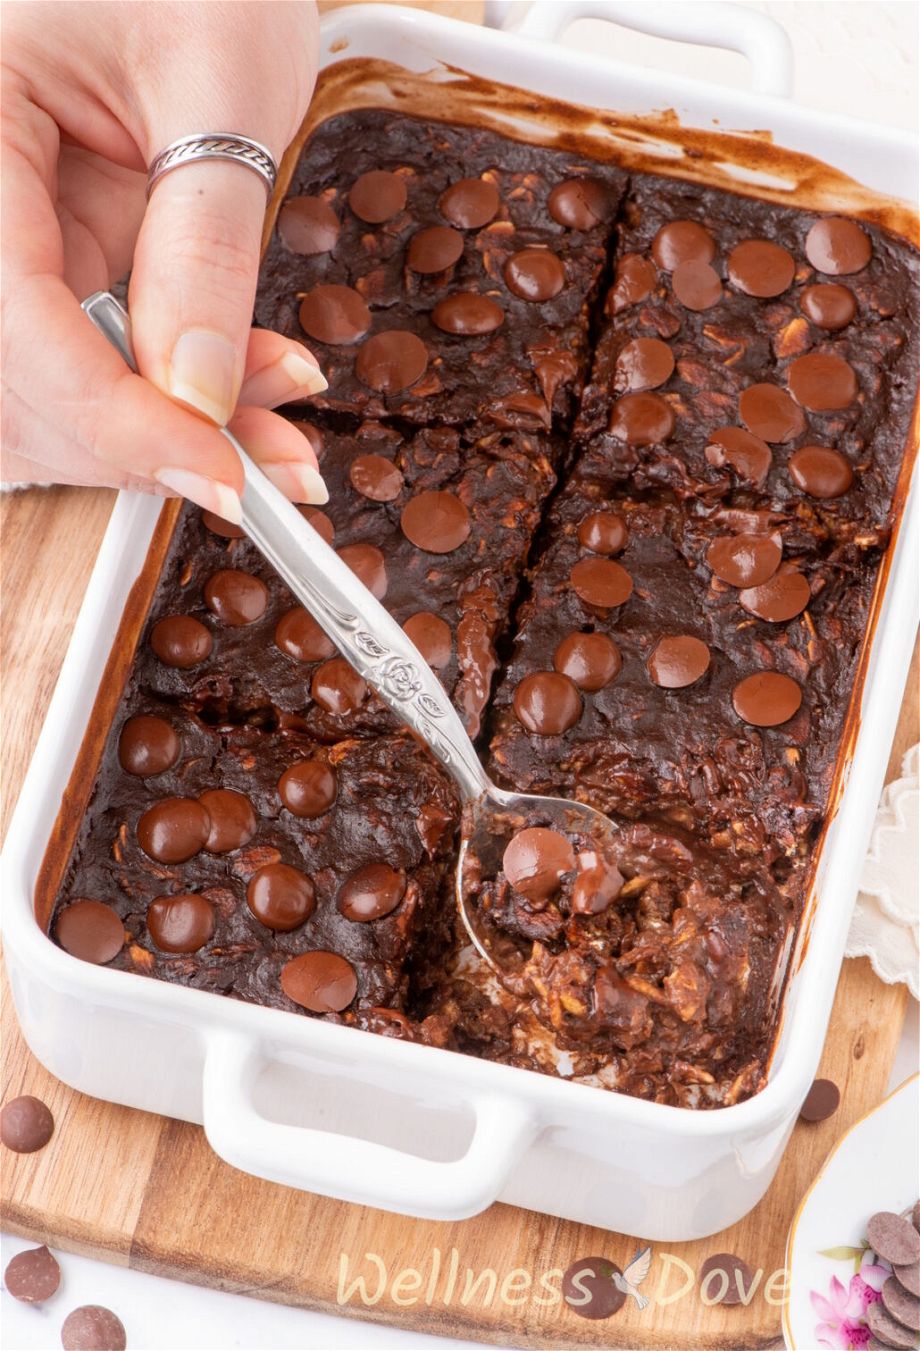 a 3/4 view of the Vegan Brownie Baked Oatmeal, a piece is missing and a hand is taking some of the brownie away with a spoon